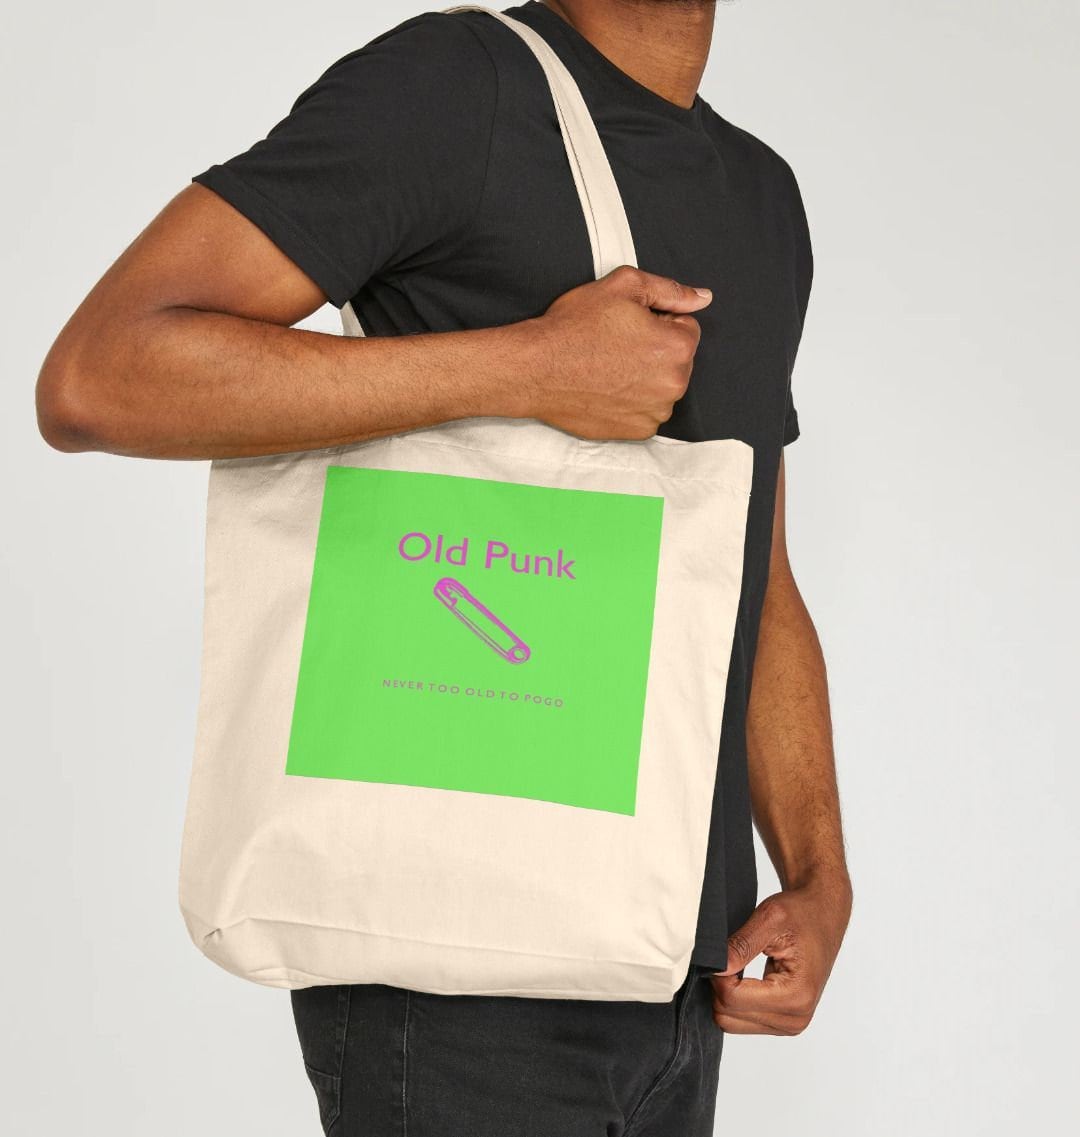 never 2 old sustainable tote bag Etsy